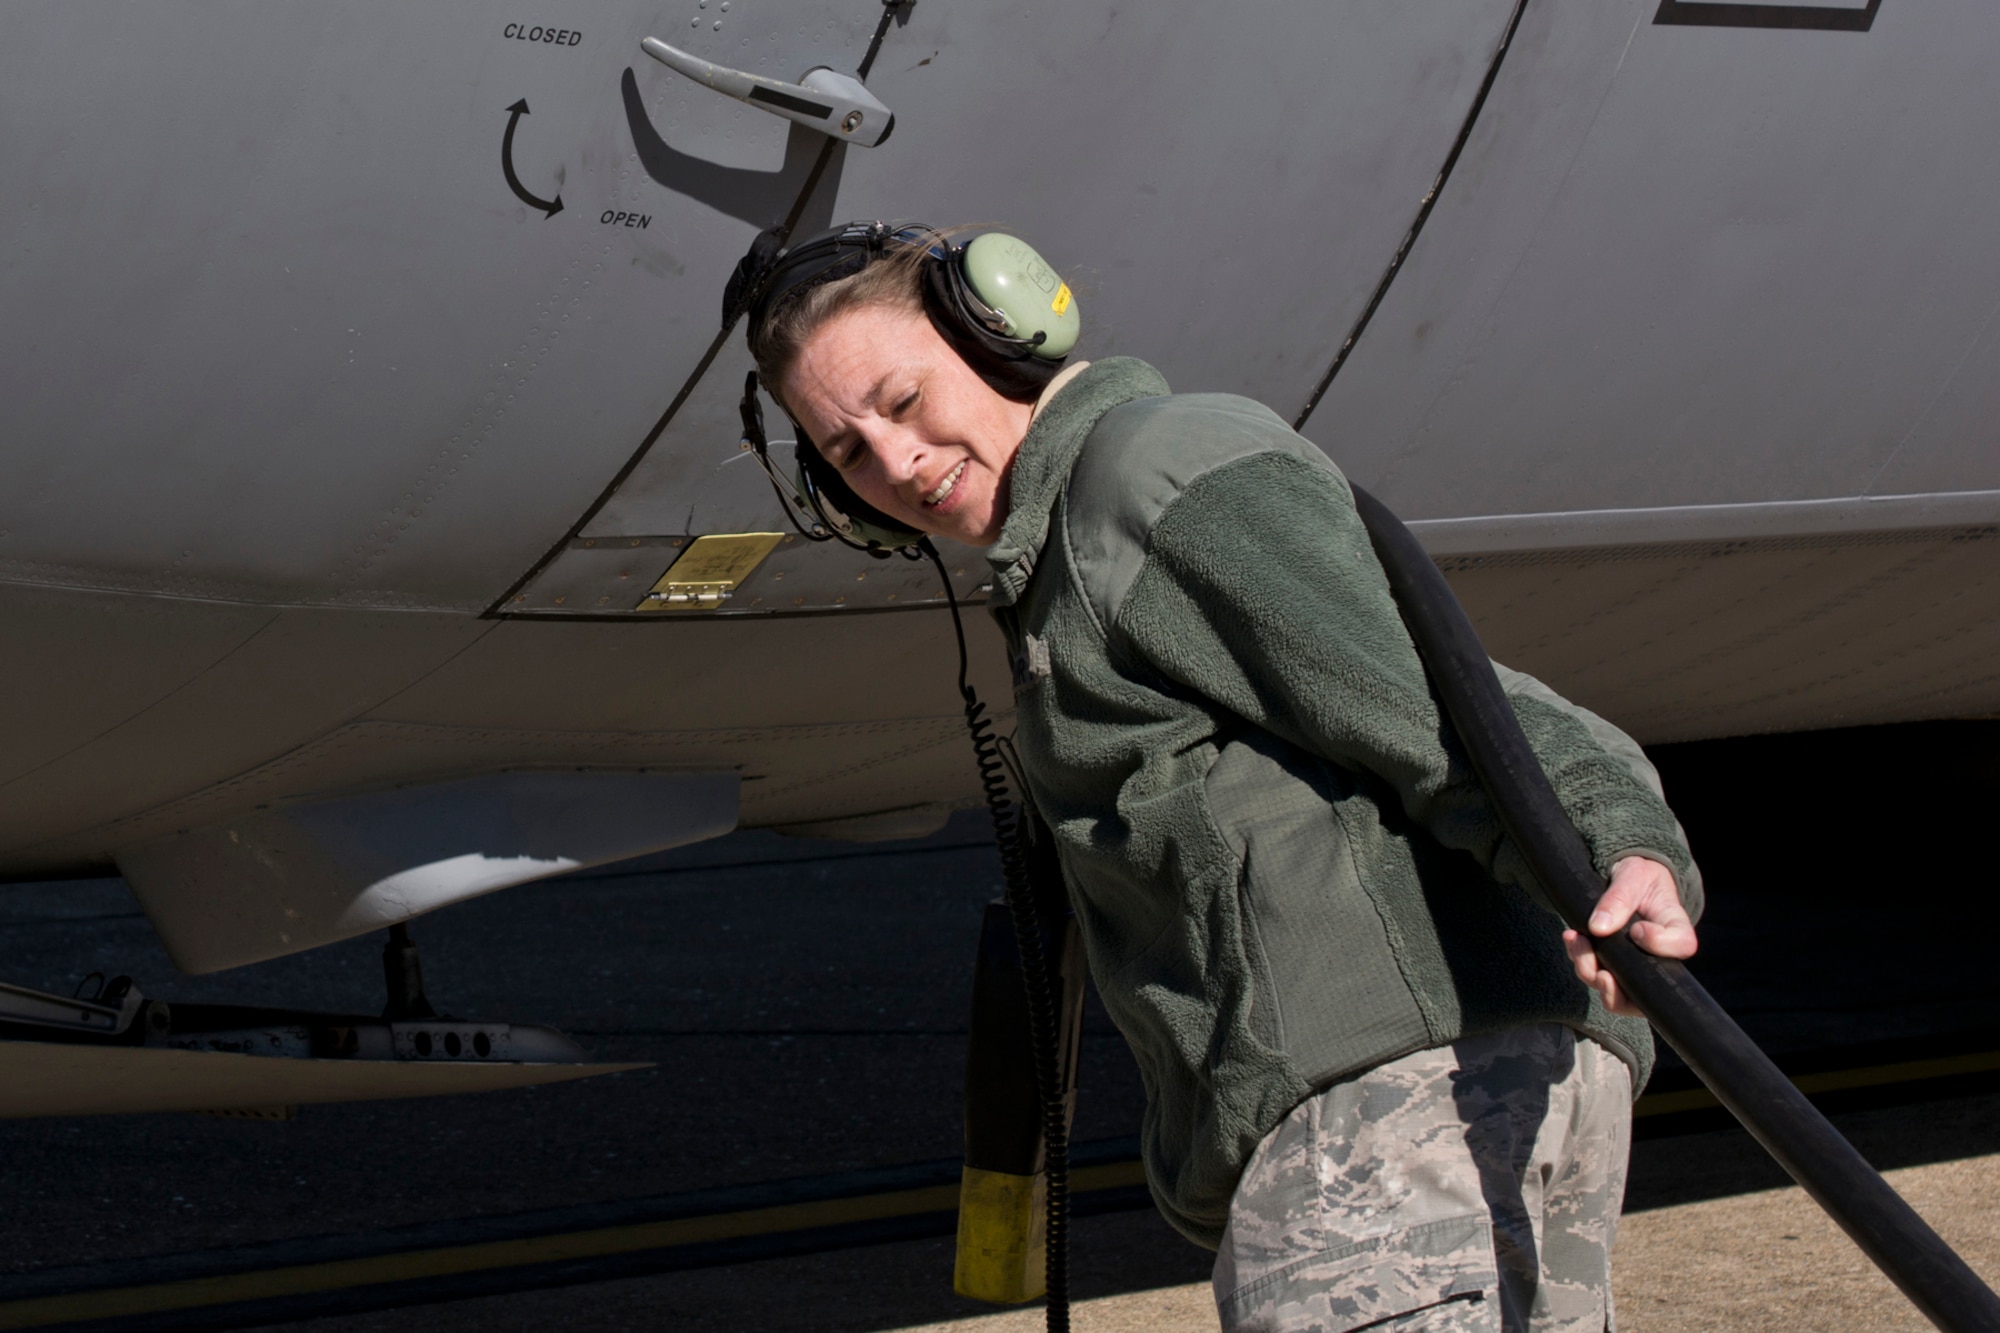 U.S. Air Force Reserve Tech. Sgt. Stephanie Martin, an engine mechanic, assigned to the 913th Maintenance Squadron, pulls a cable from a start cart at Little Rock Air Force Base, Ark., Jan. 28, 2016. The trailer-mounted power unit provides AC and DC power for aircraft electrical systems as well as high volume air for starting aircraft engines. (U.S. Air Force photo by Master Sgt. Jeff Walston/Released)